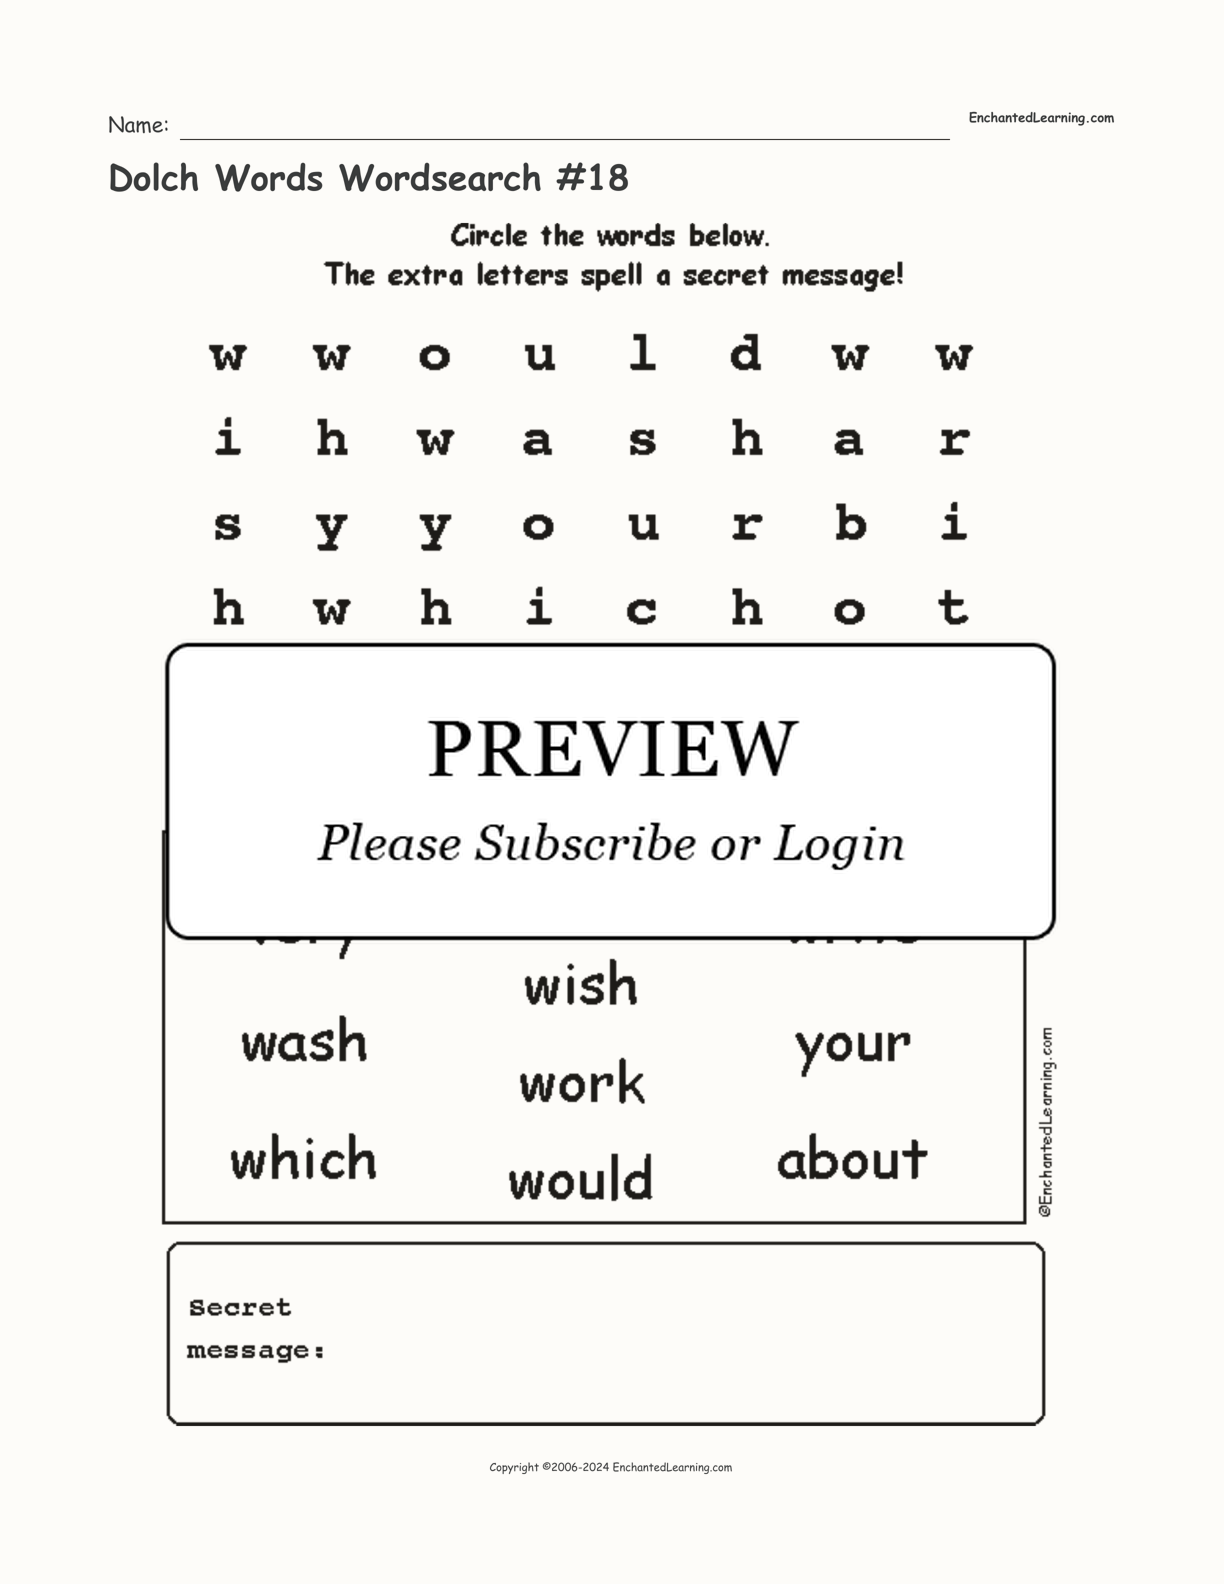 Dolch Words Wordsearch #18 interactive worksheet page 1